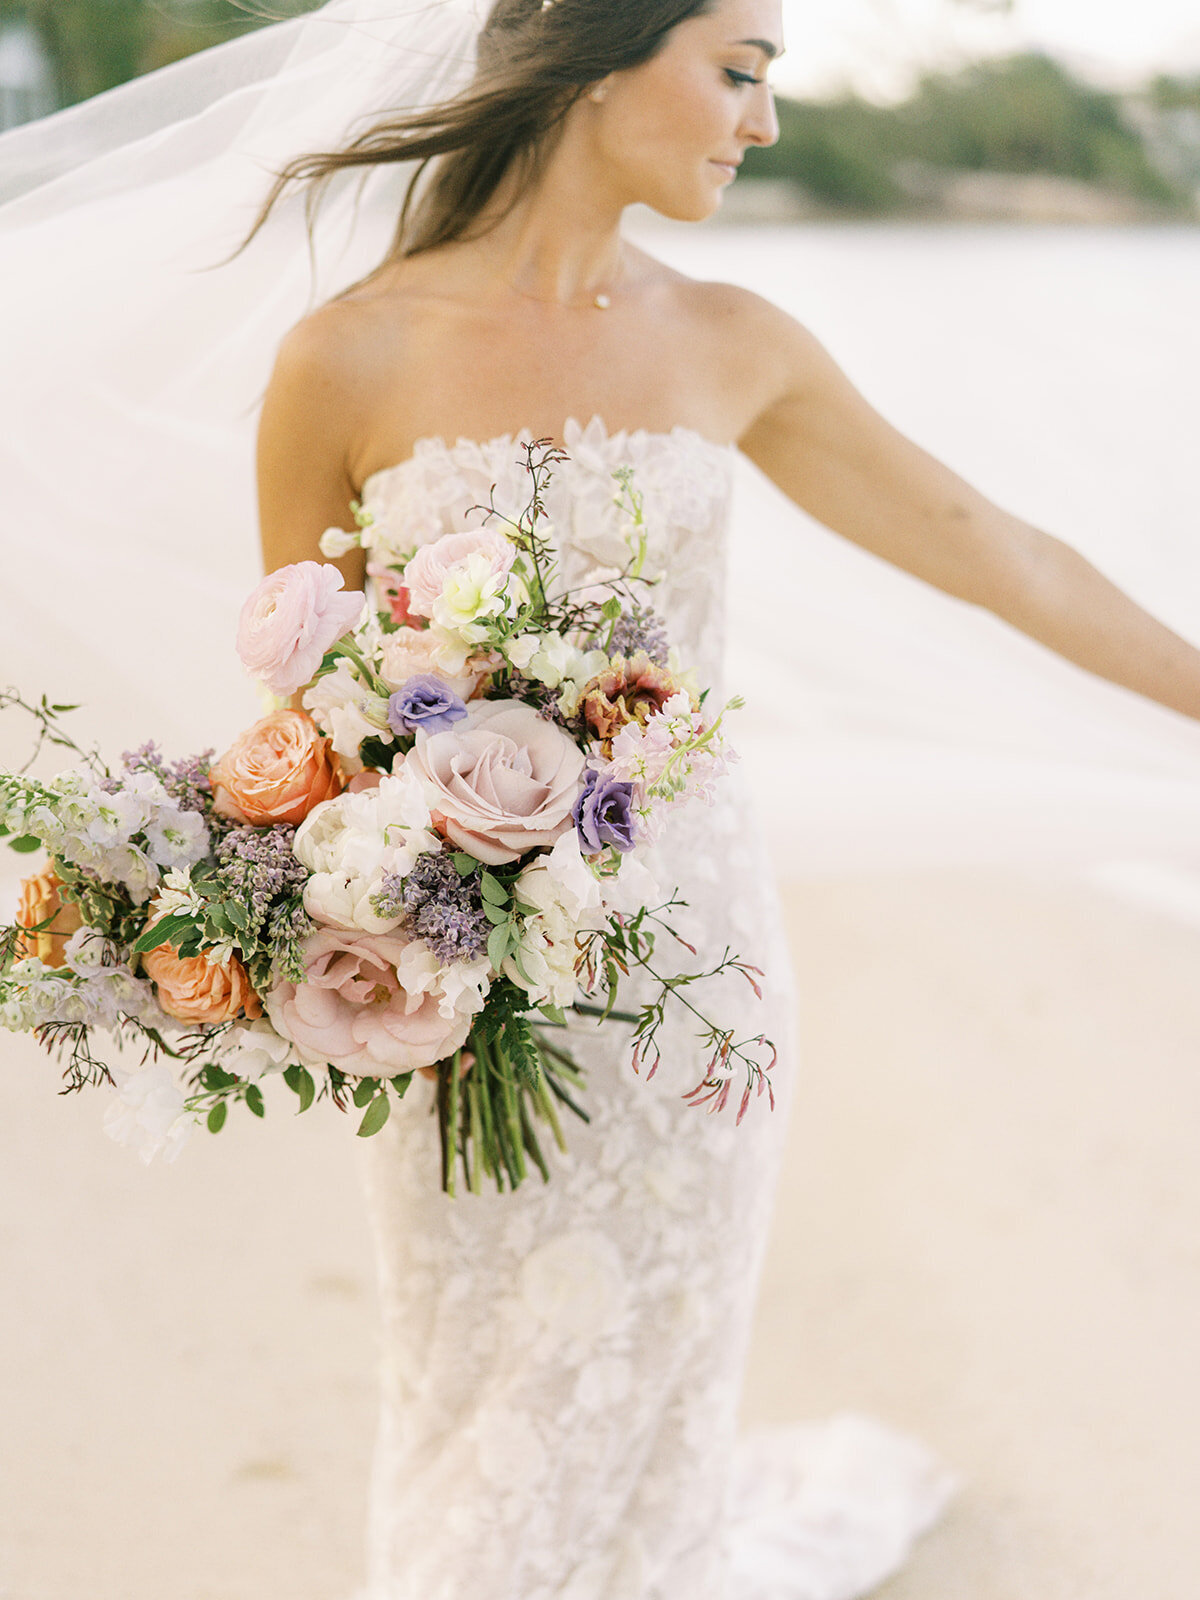 Lush floral heavy bridal bouquet for tropical destination wedding in Exuma, Bahamas. Bouquet in colors of peach, lavender, blush, cream, orange, and pale yellow. Private estate beach wedding. Destination floral design by Rosemary & Finch Floral Design.